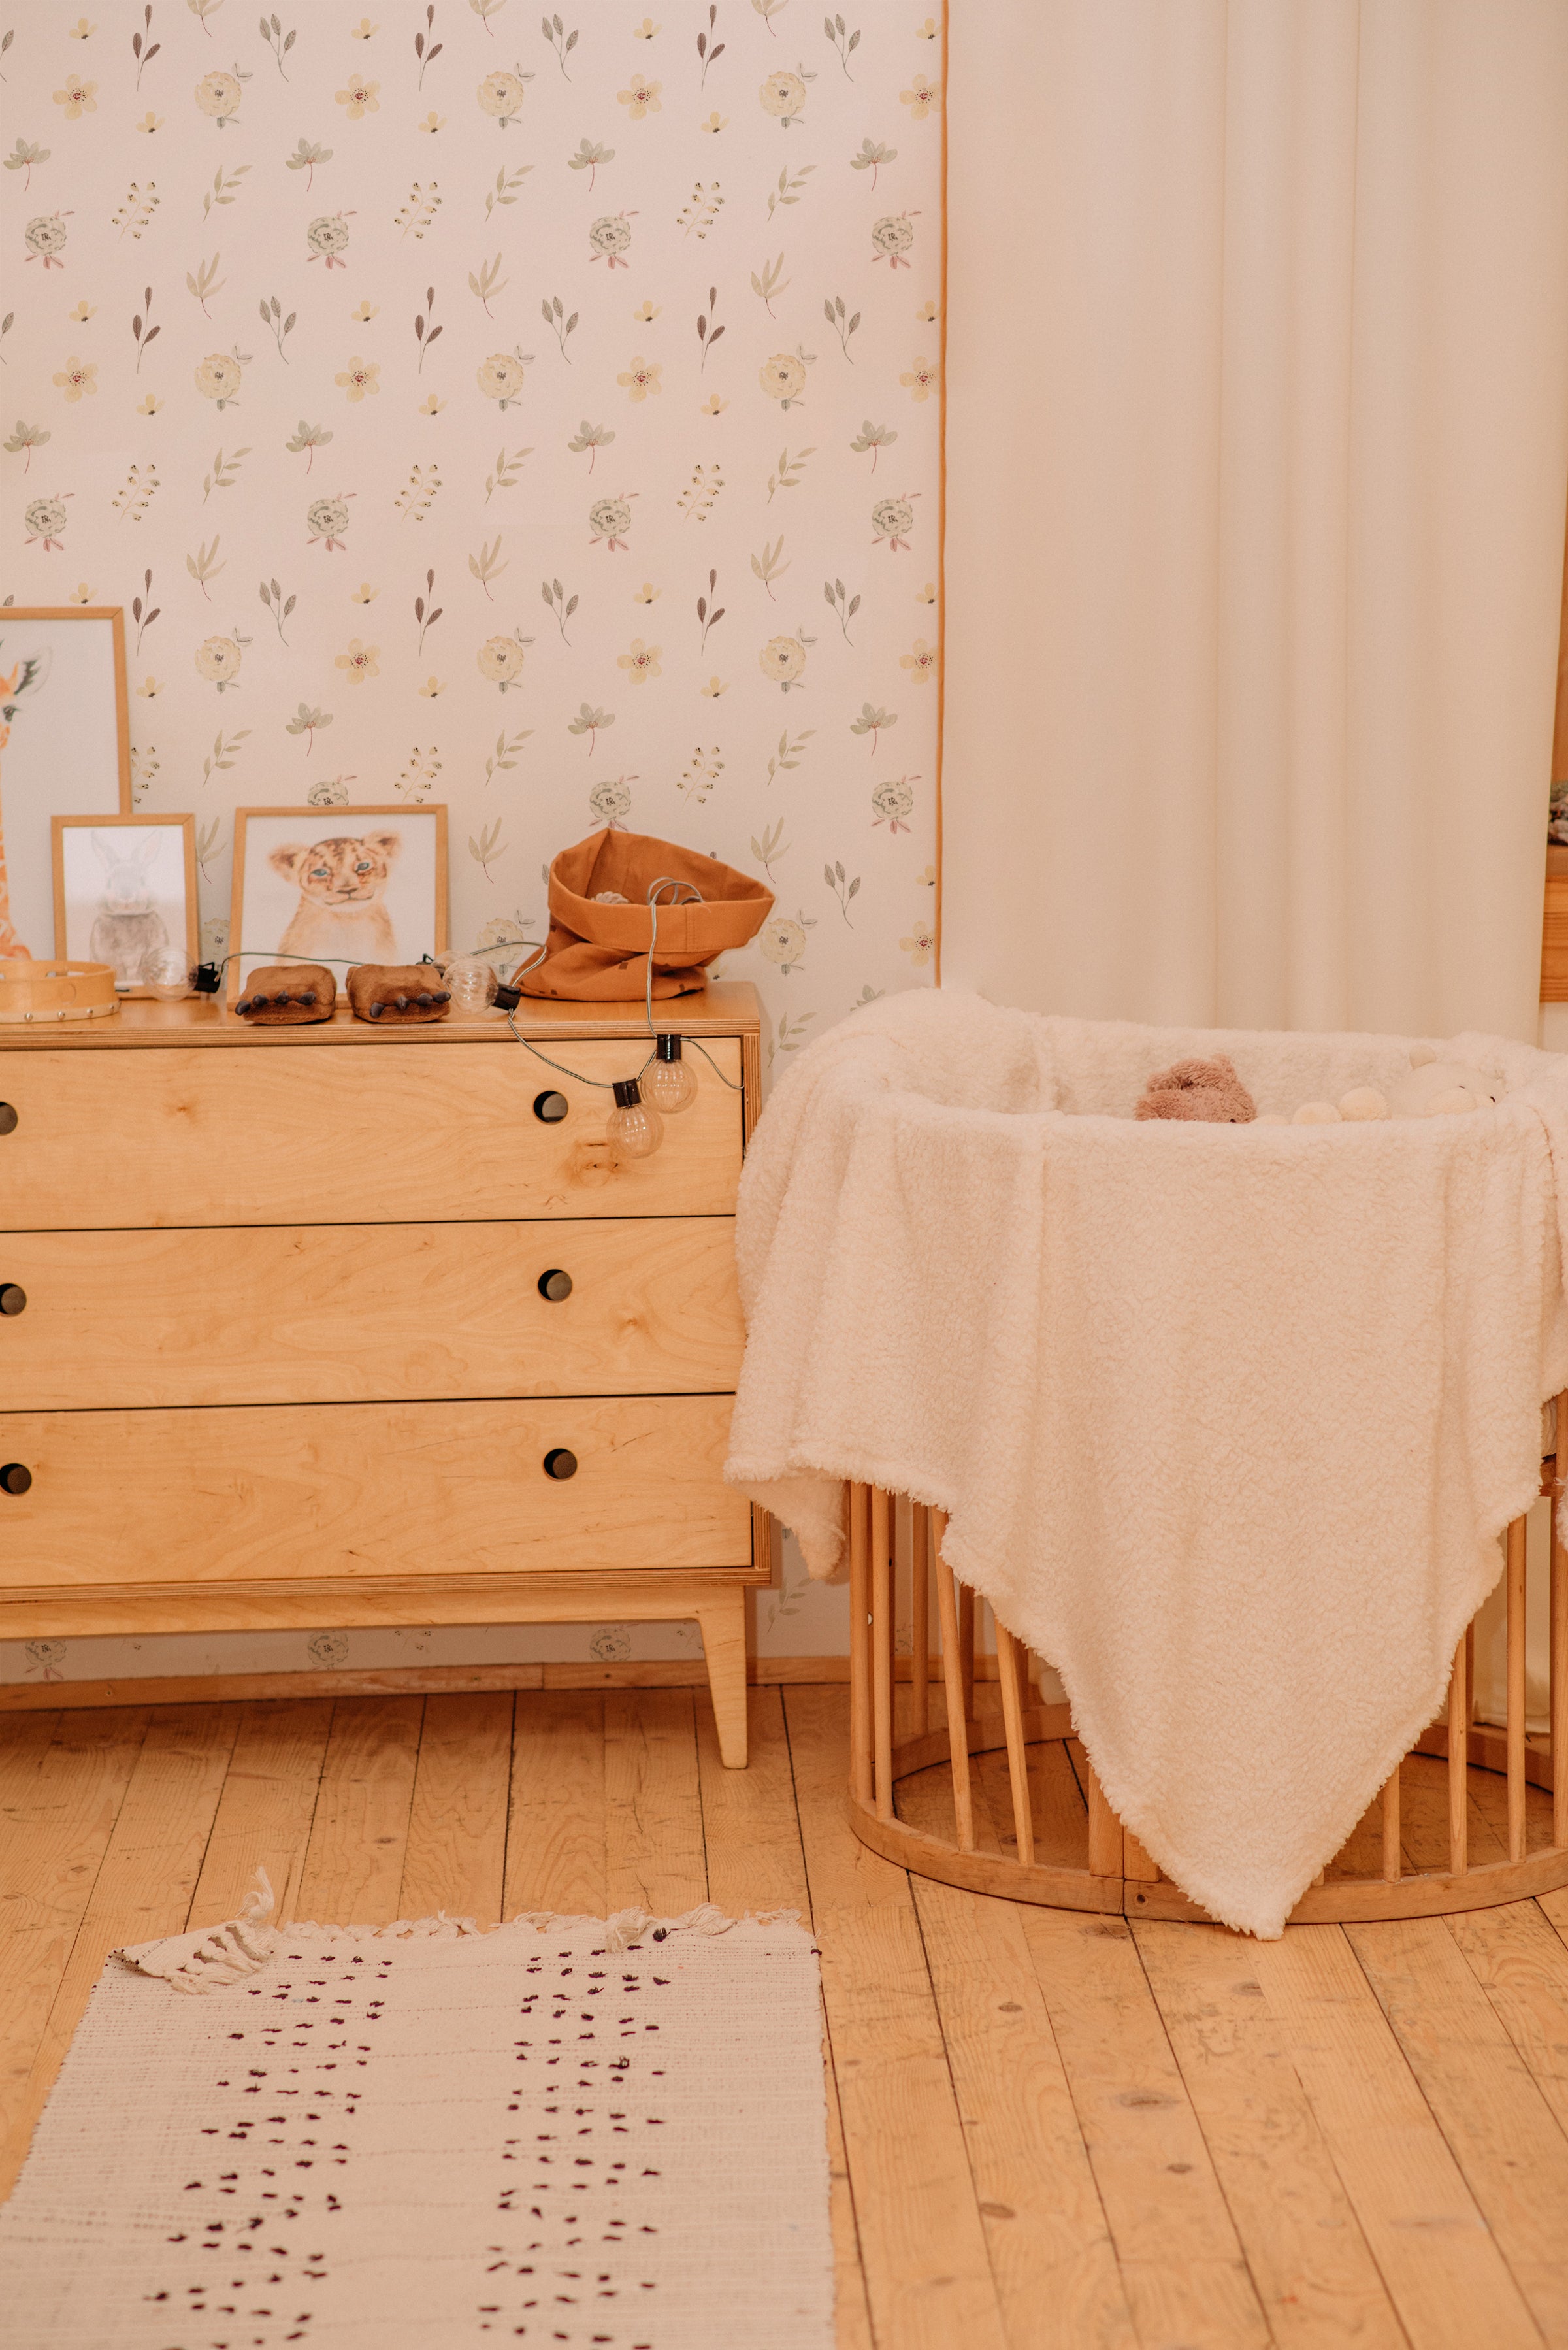 A warmly lit nursery with a soft pink Sunny Floral Wallpaper adorned with delicate blooms and foliage, accompanied by a wooden chest of drawers and a comfy rocking crib with a plush blanket.